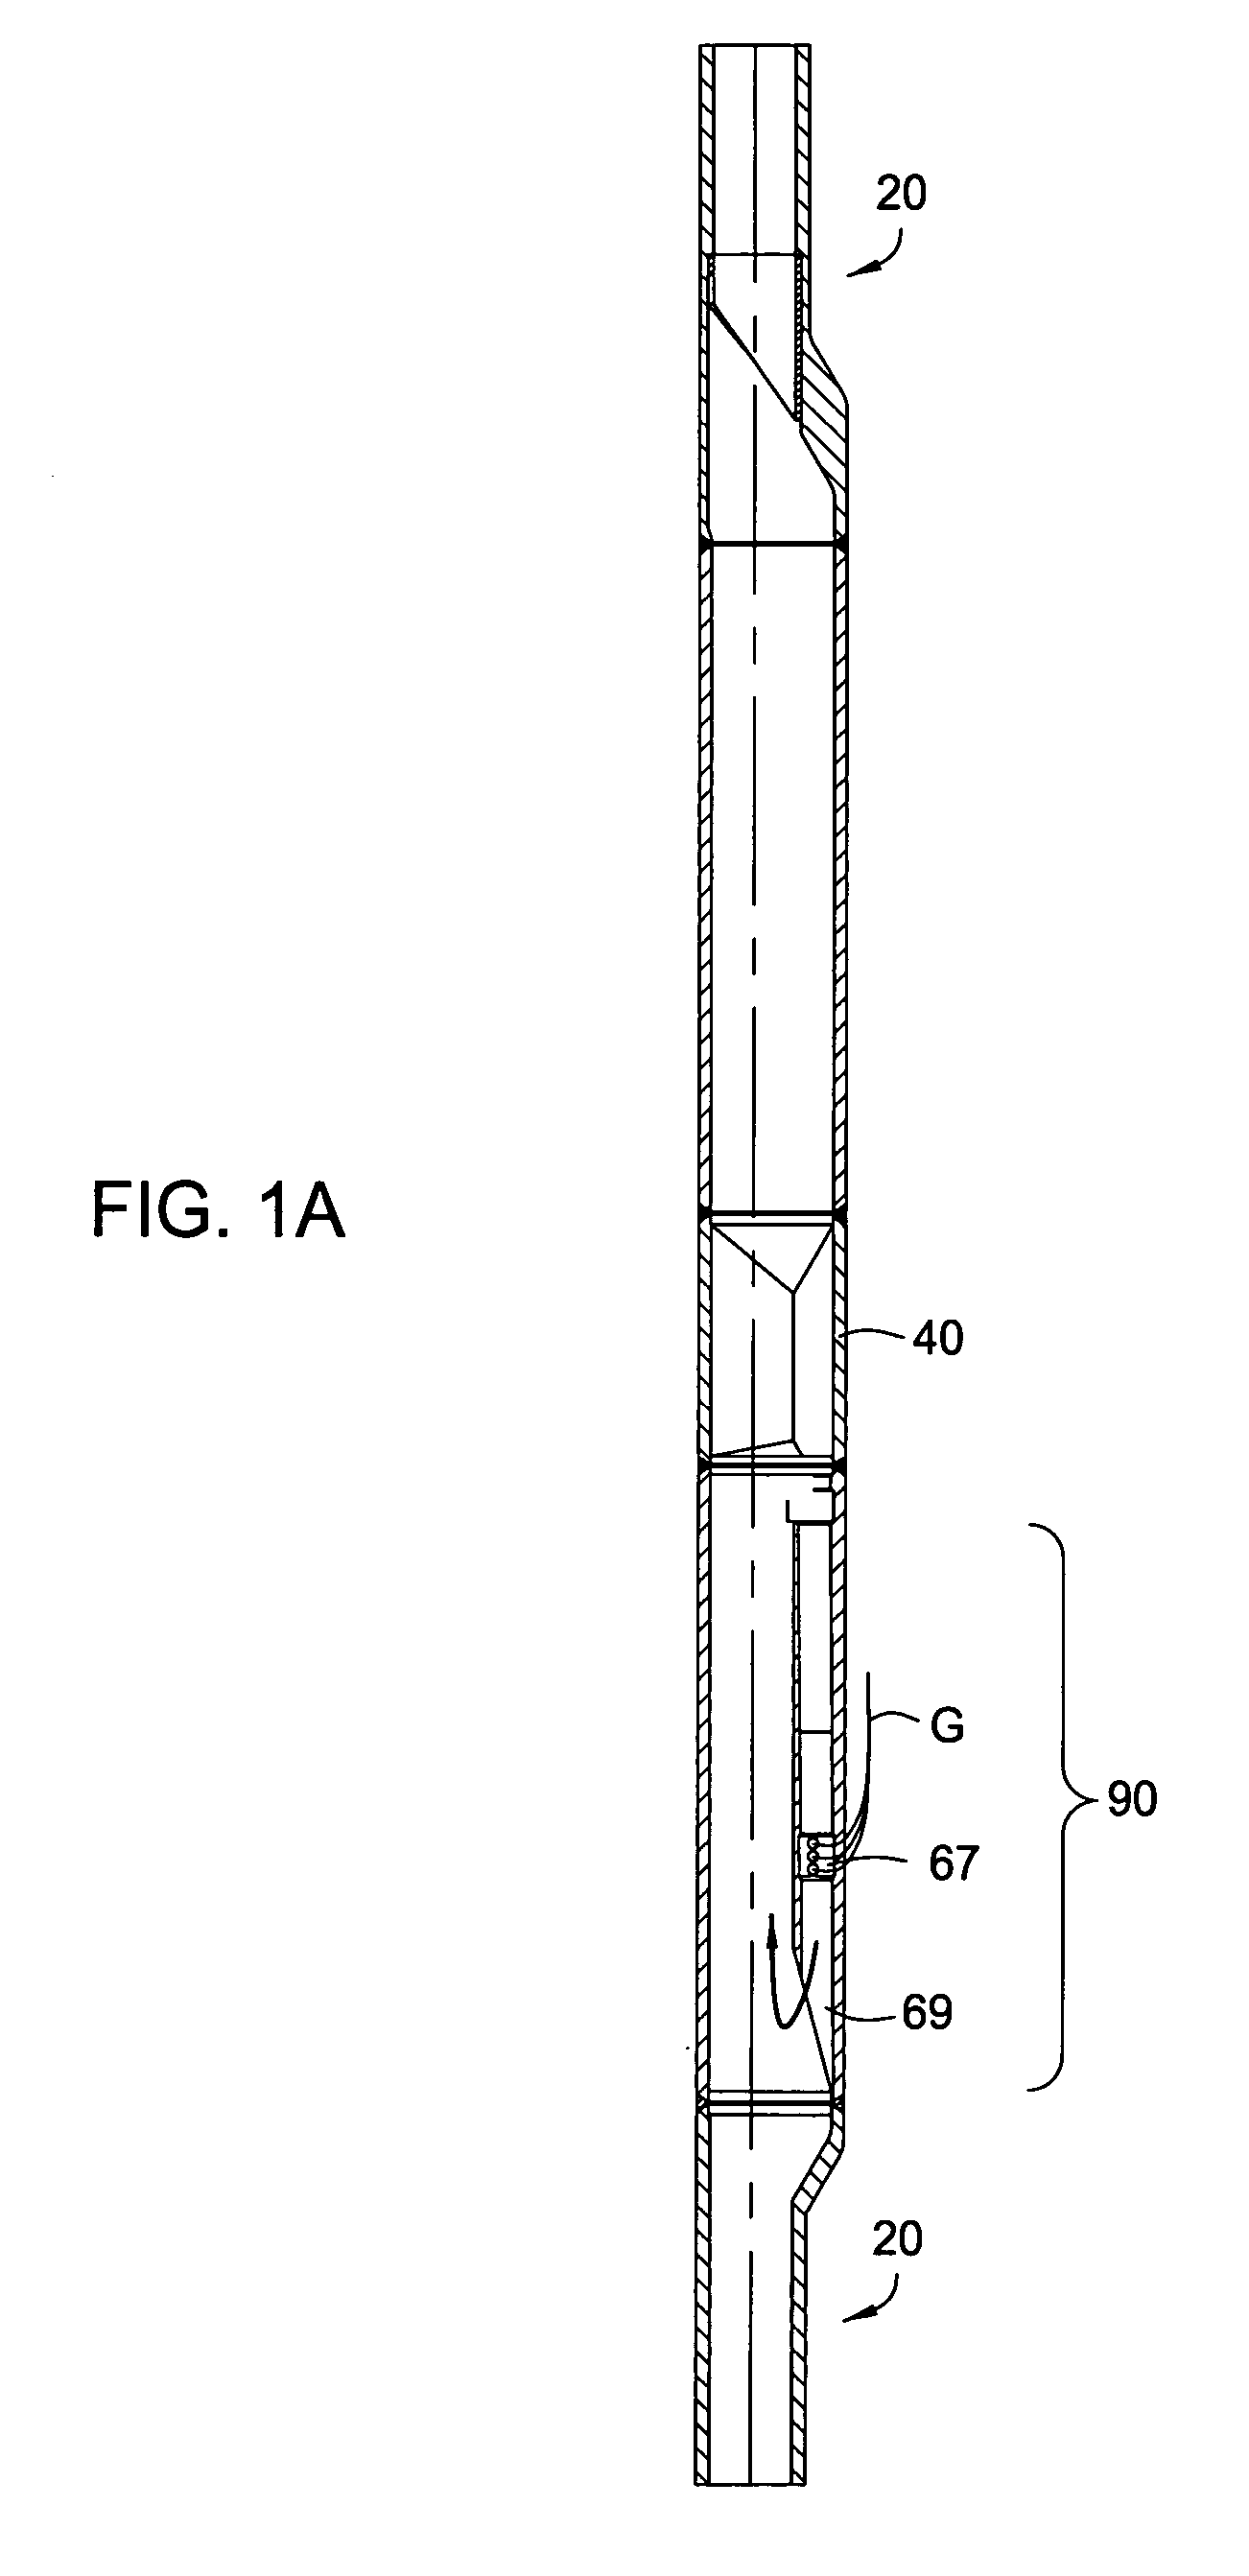 One-way valve for a side pocket mandrel of a gas lift system